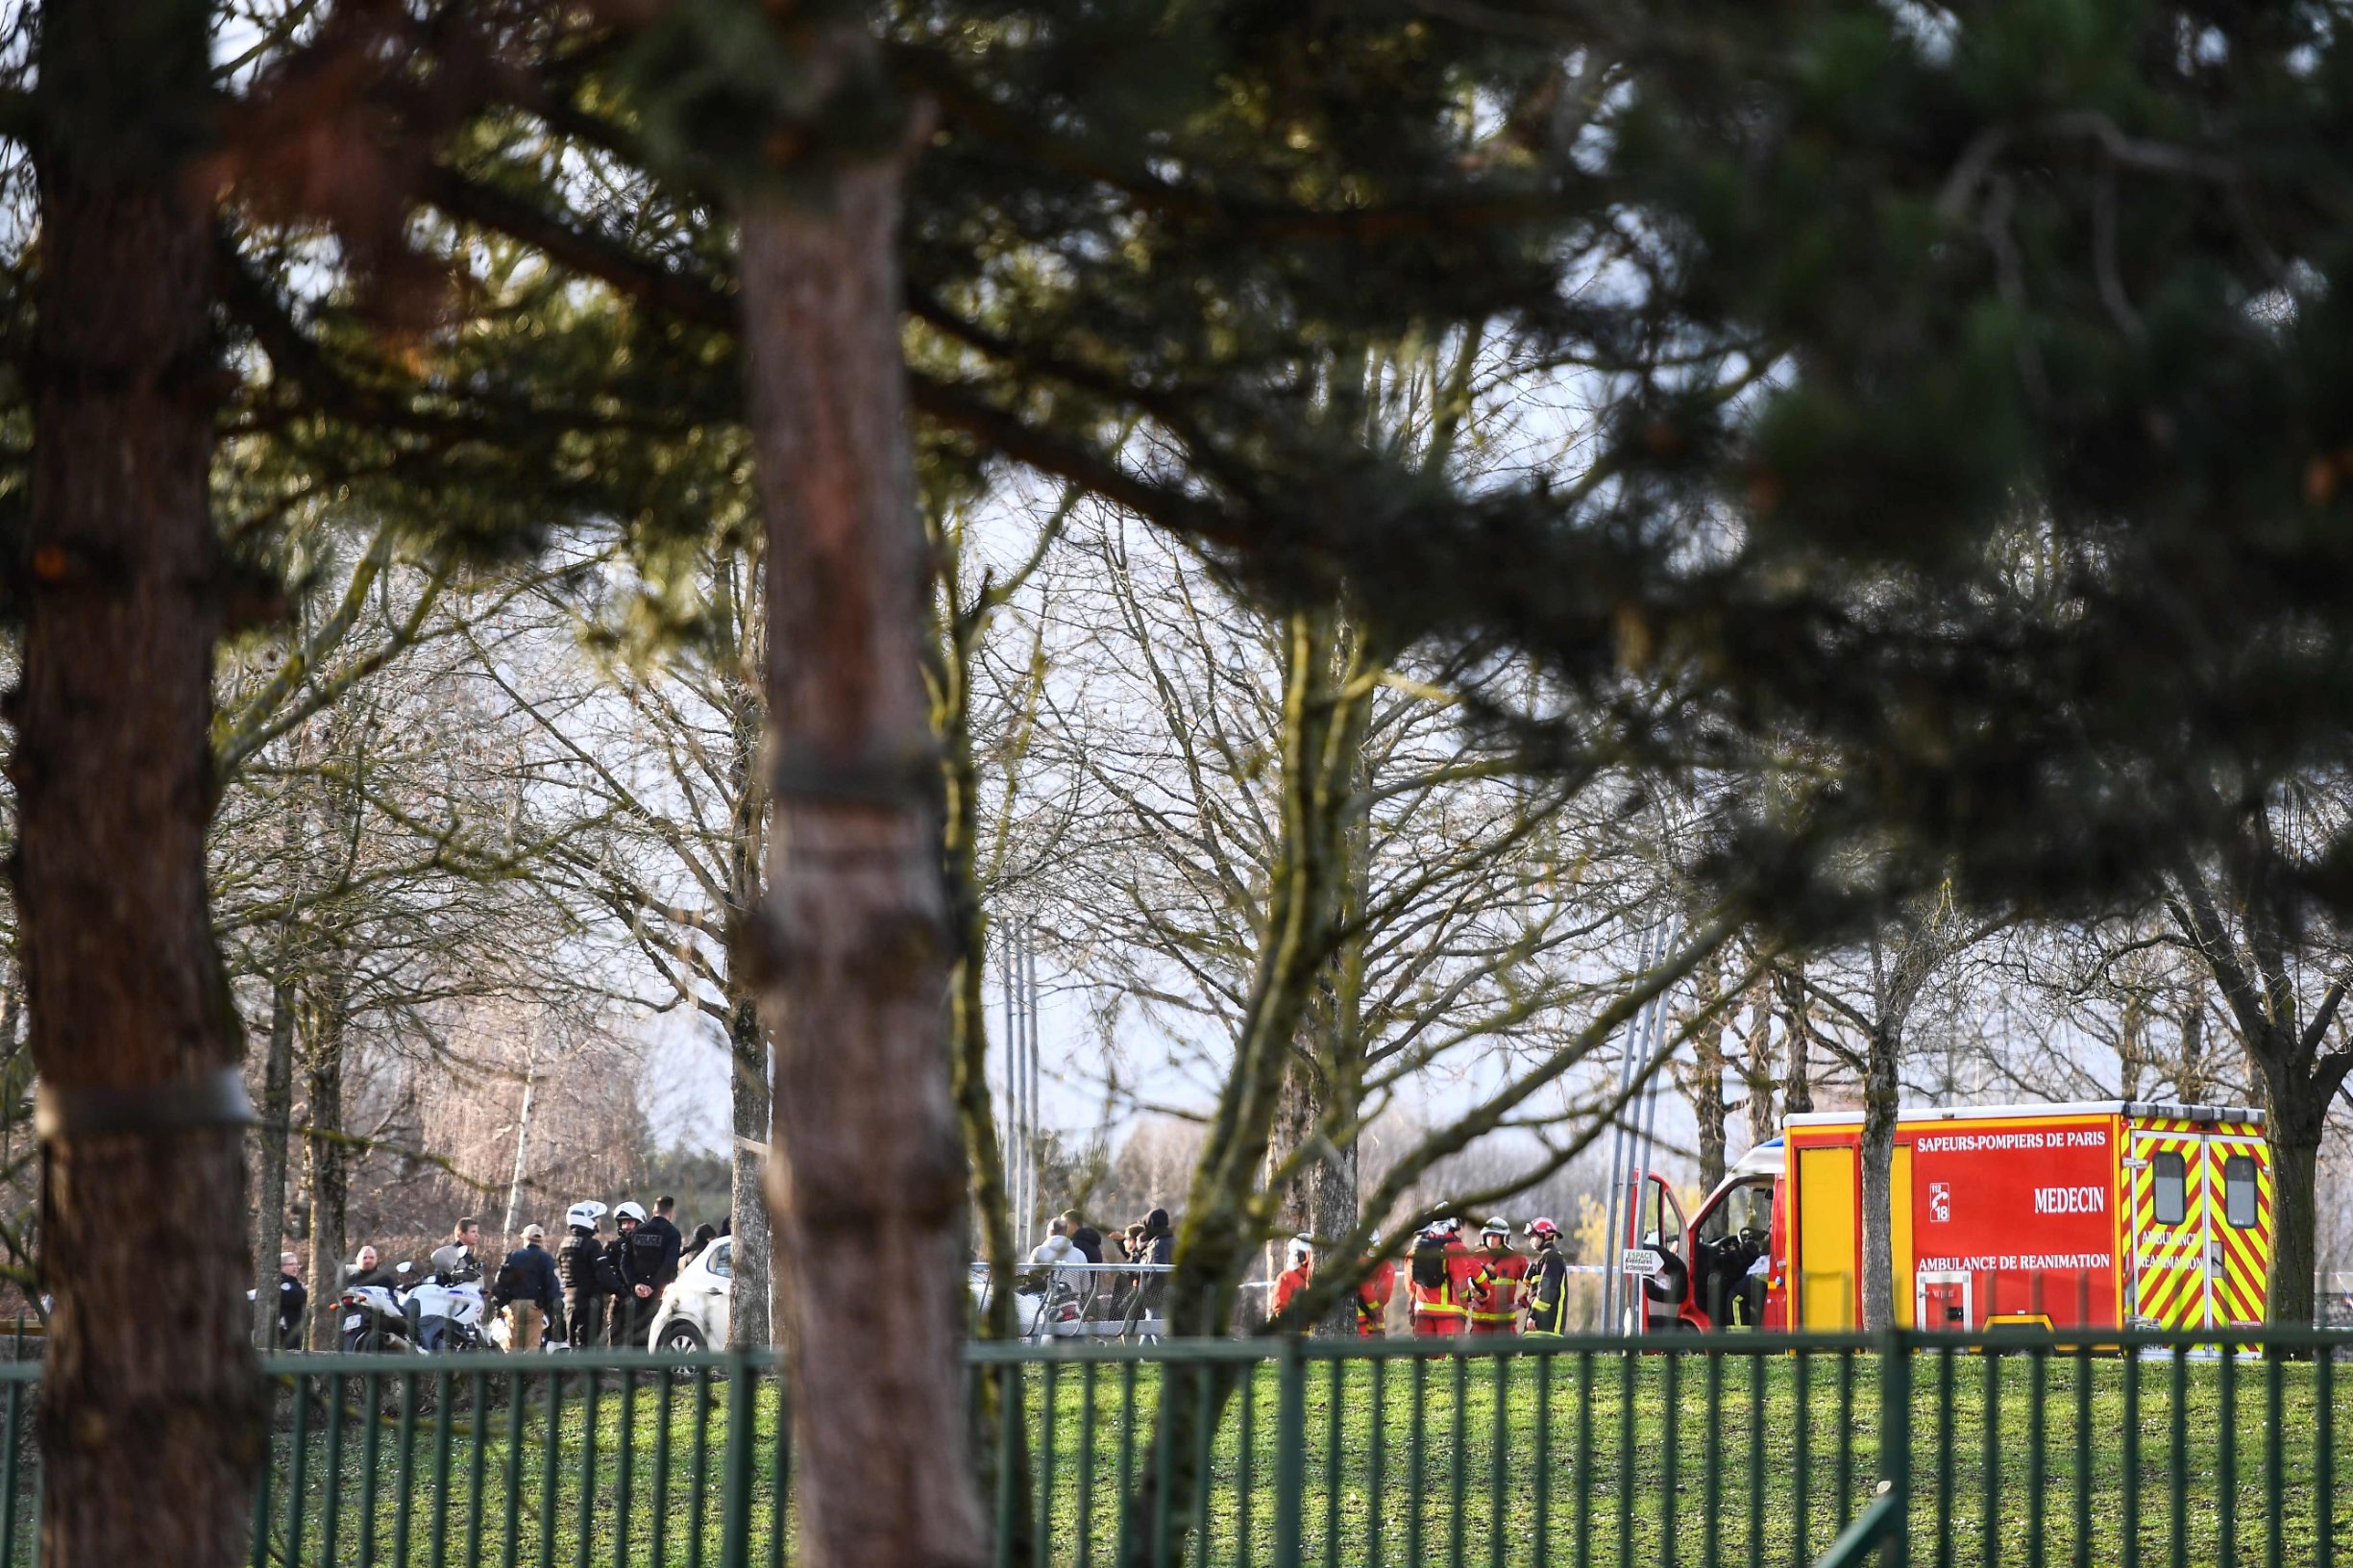 Police and firefighters gather in a park in the south of Paris' suburban city of Villejuif on January 3, 2020 where a man was shot and killed by officers after stabbing passers-by. - The man had attacked 